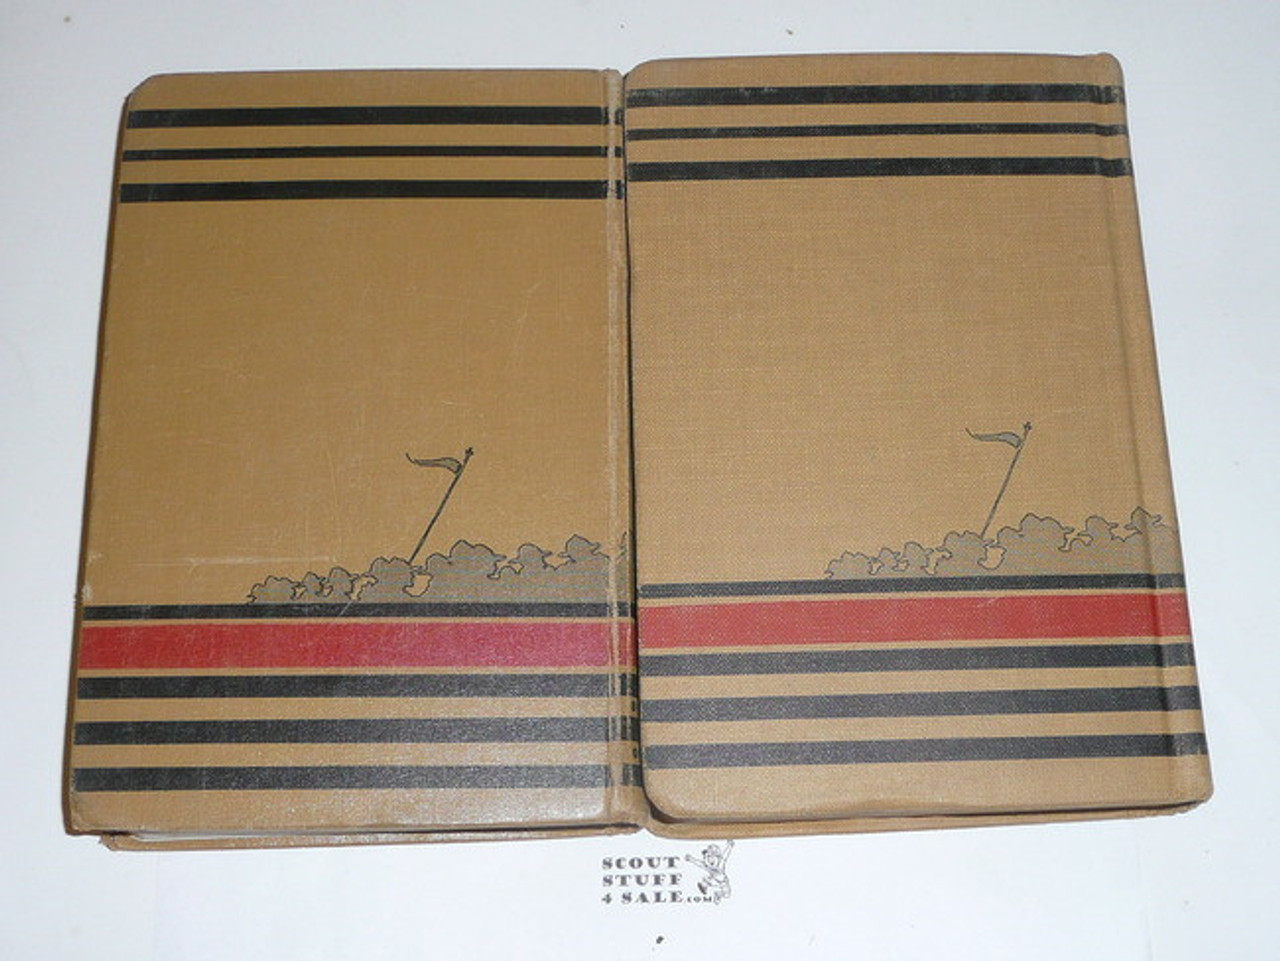 1942 Handbook For Scoutmasters, Third Edition, RARE Matched Pair, Vol 1 is Eighth printing (3-42) & Vol 2 is Seventh printing (7-42), Both in MINT Condition